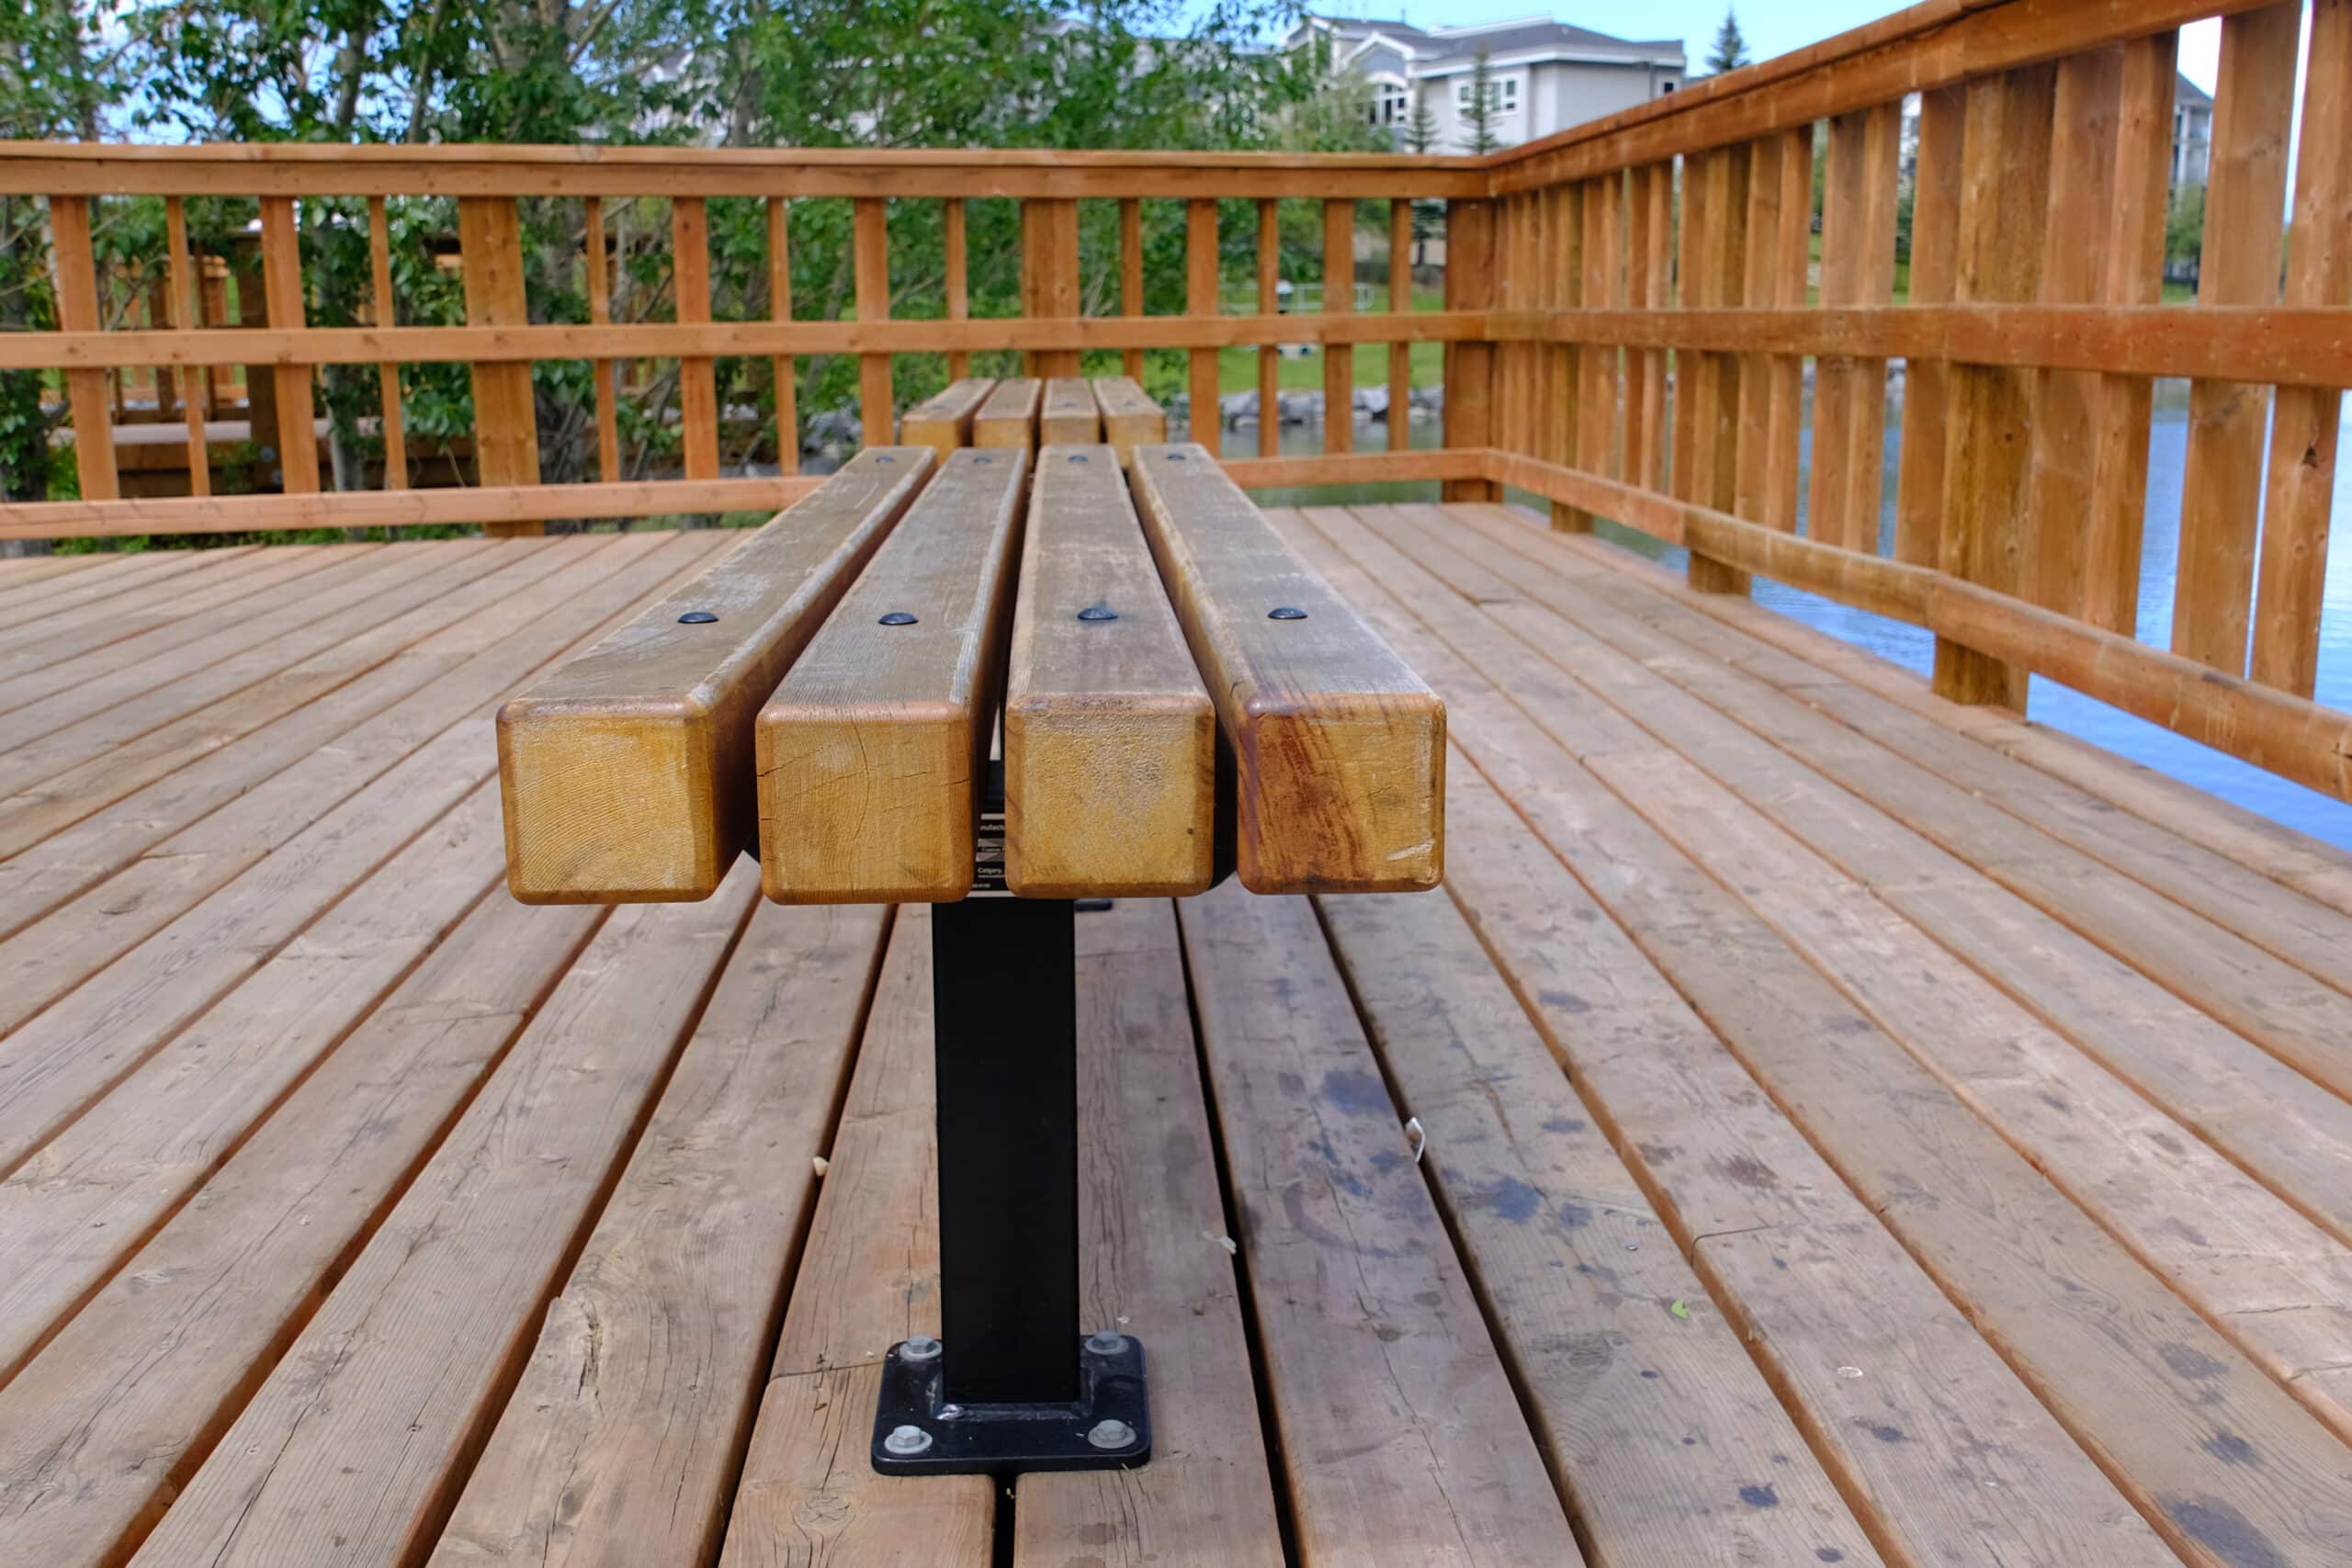 How does a new deck raise your home's resale value